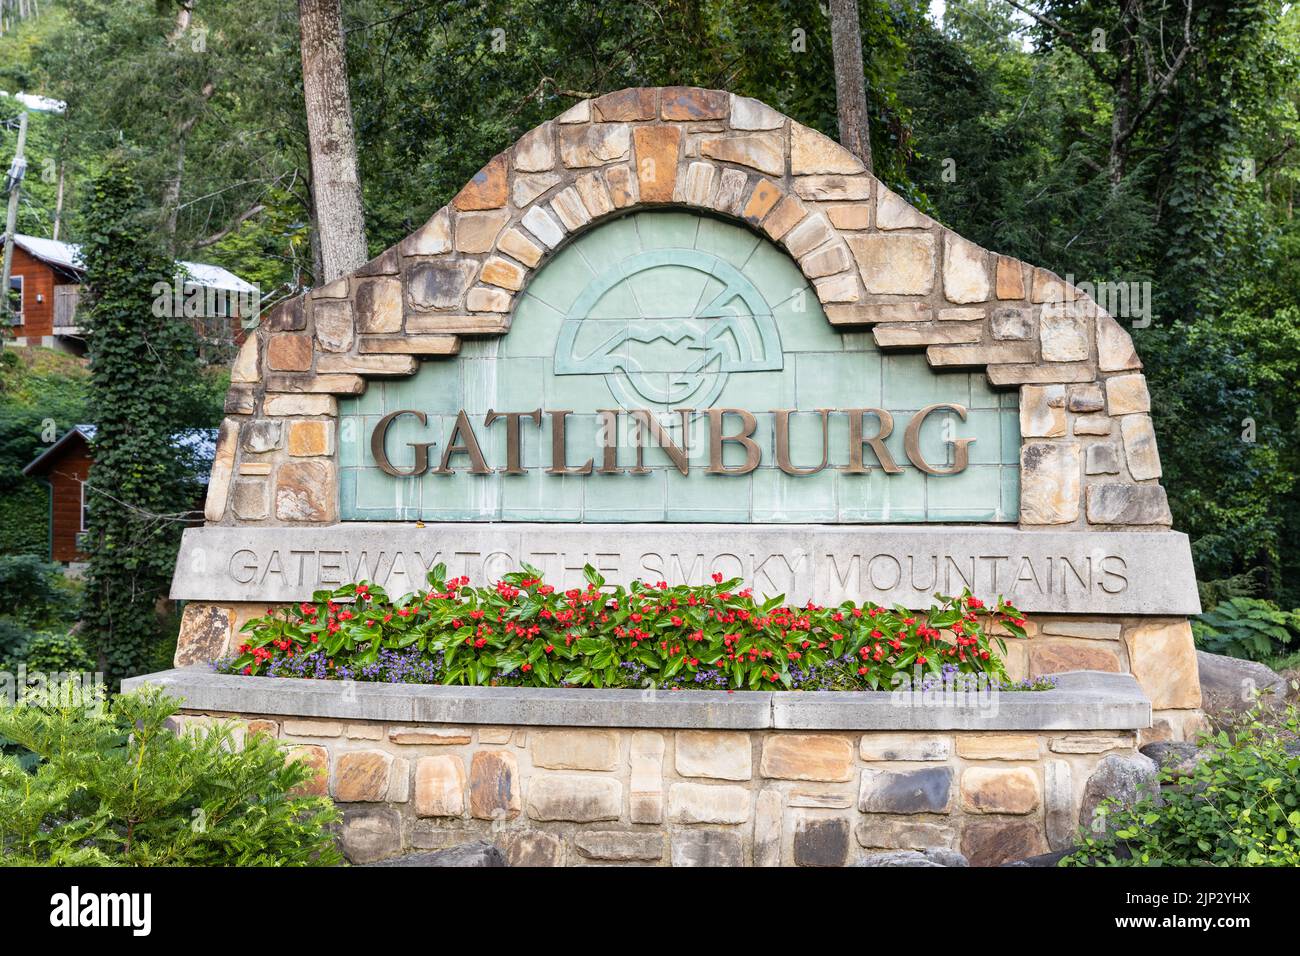 The Gatlinburg, 'Gateway to the Mountains' sign welcoming visitors, located in the Great Smoky Mountain National Park. Stock Photo